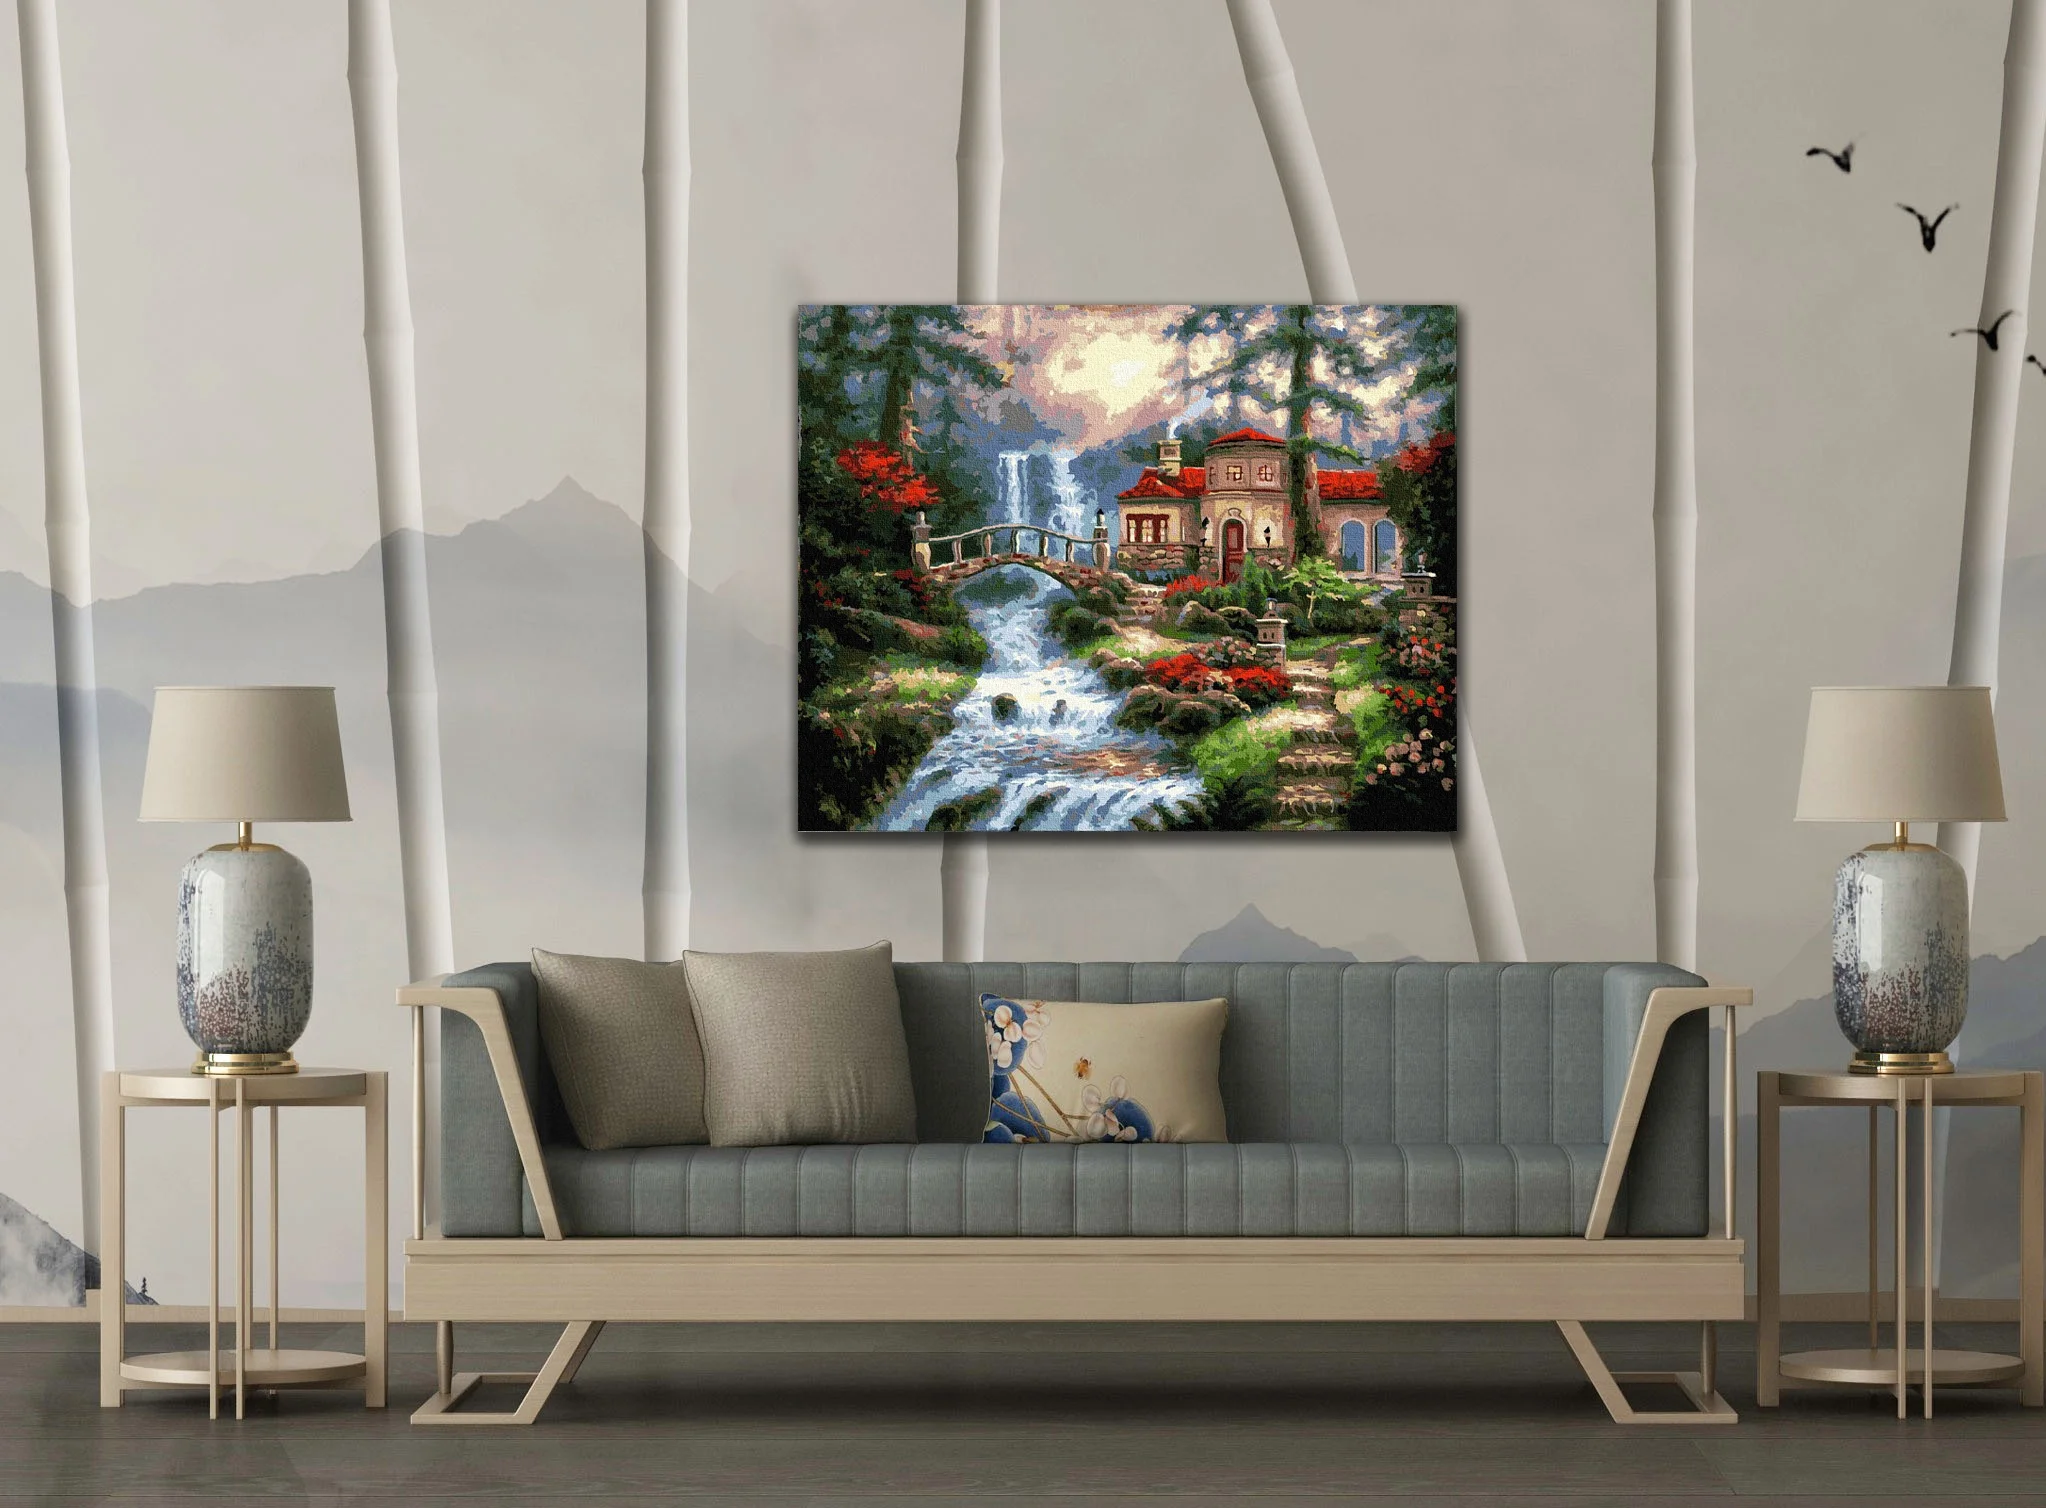 Paint boy Forest villa scenery oil painting digital diy waterfall landscape painting 40*50cm  decorative painting